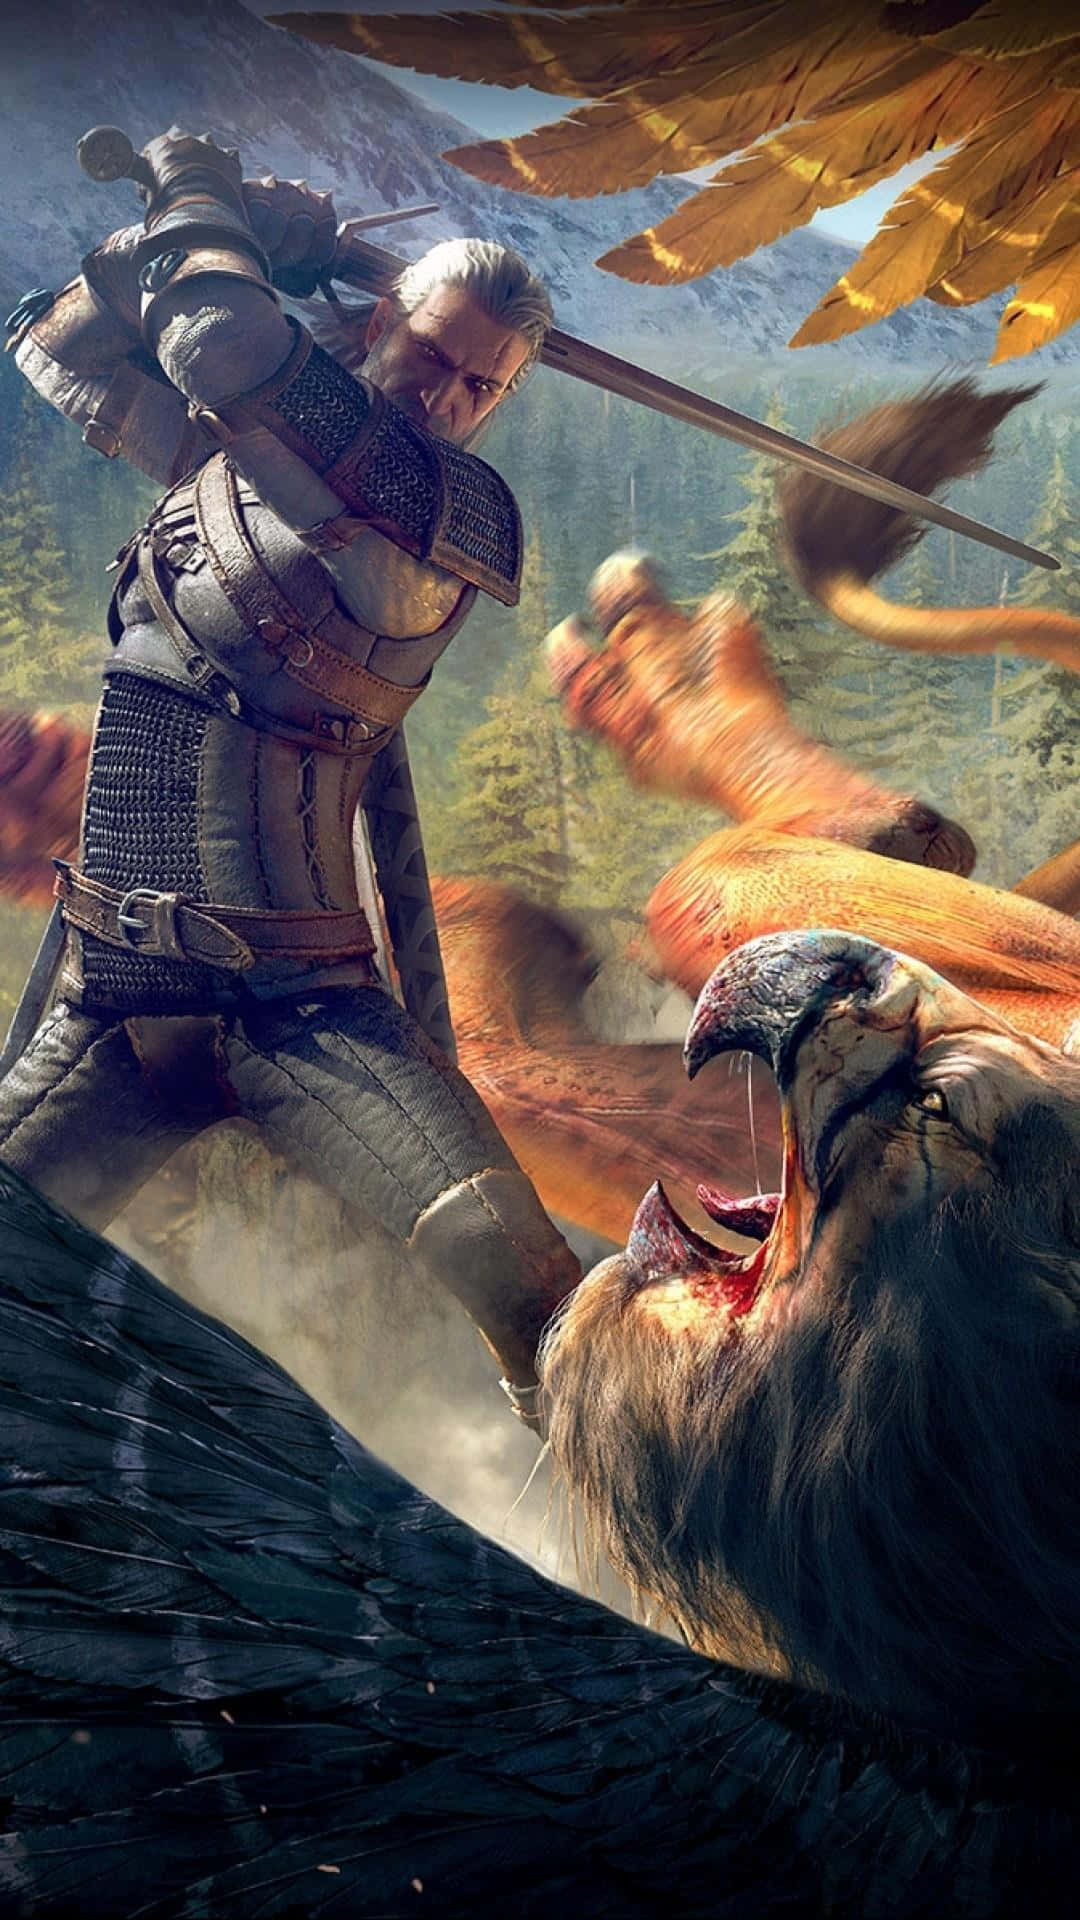 Explore the wild hunt and expand your journey with a Witcher 3 phone Wallpaper